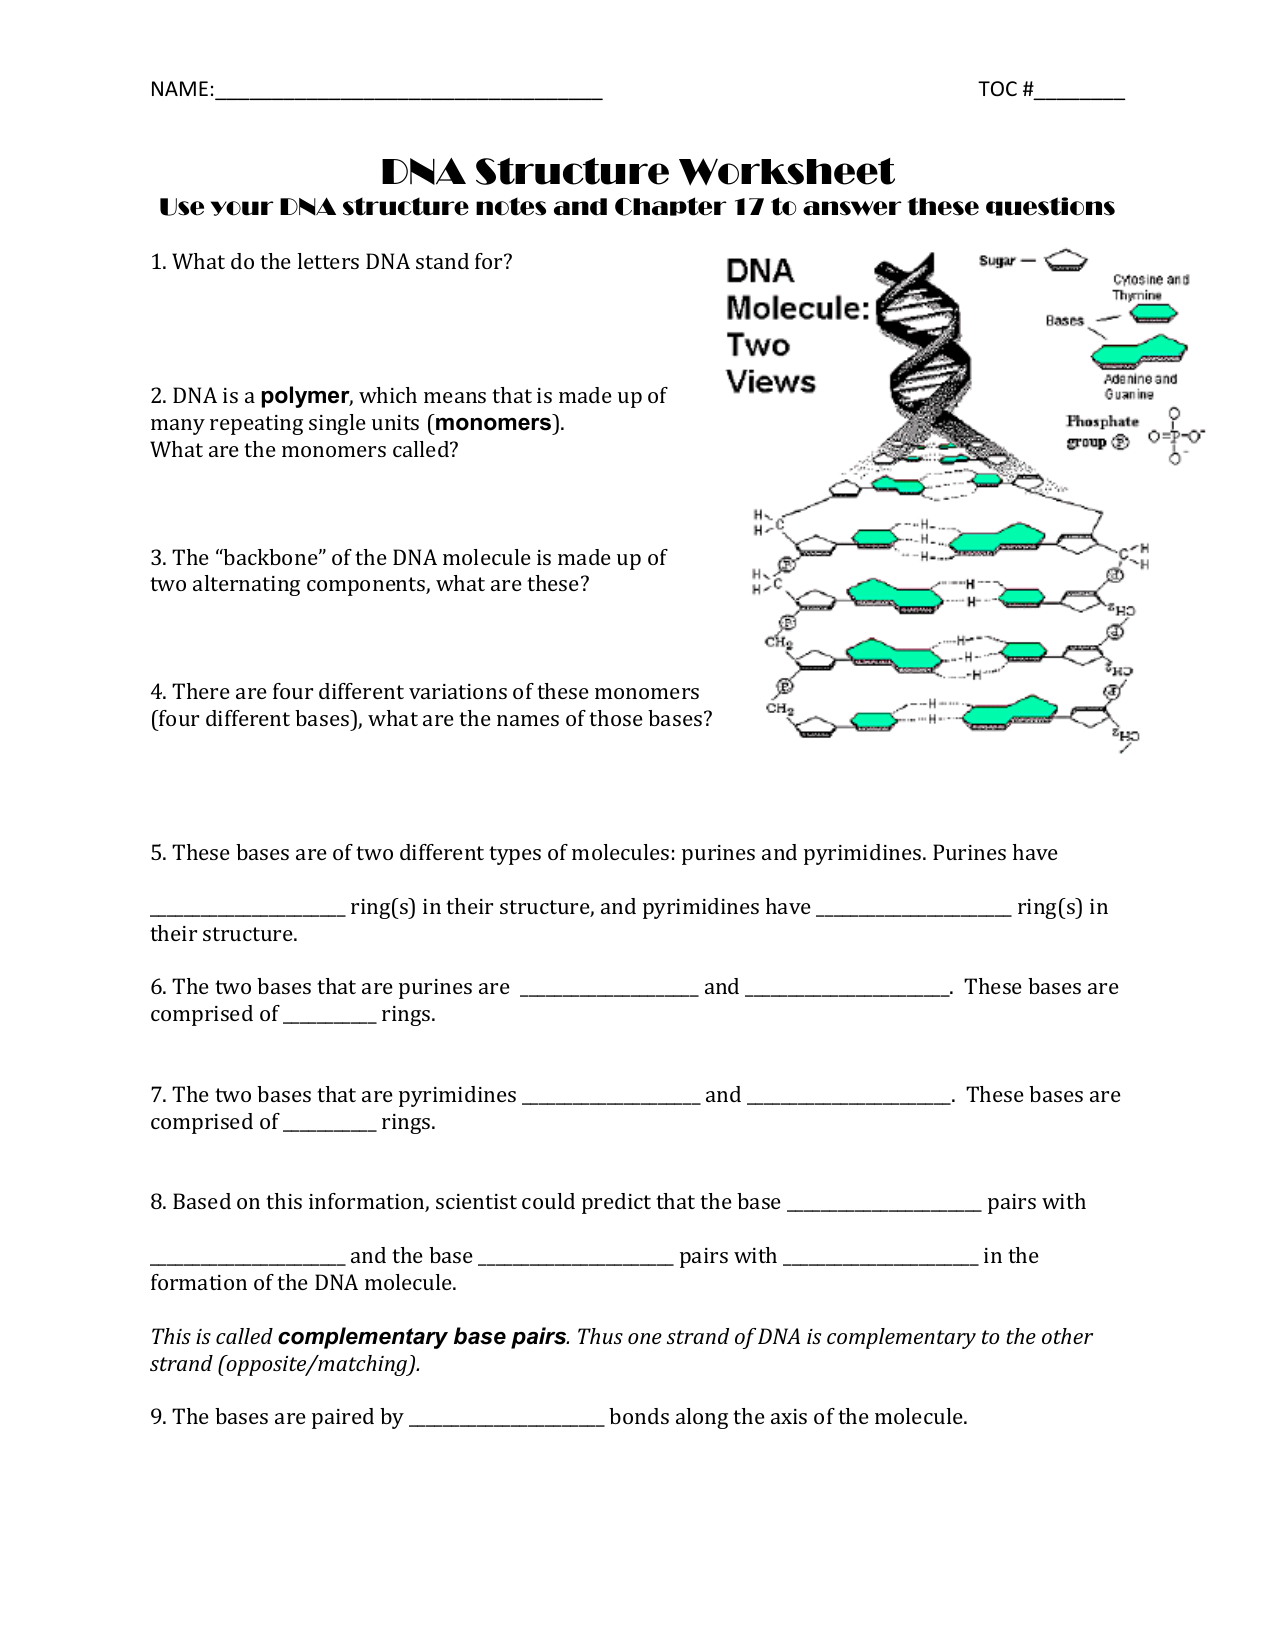 The Letters Dna Stand For Worksheet Answers  Mamiihondenk